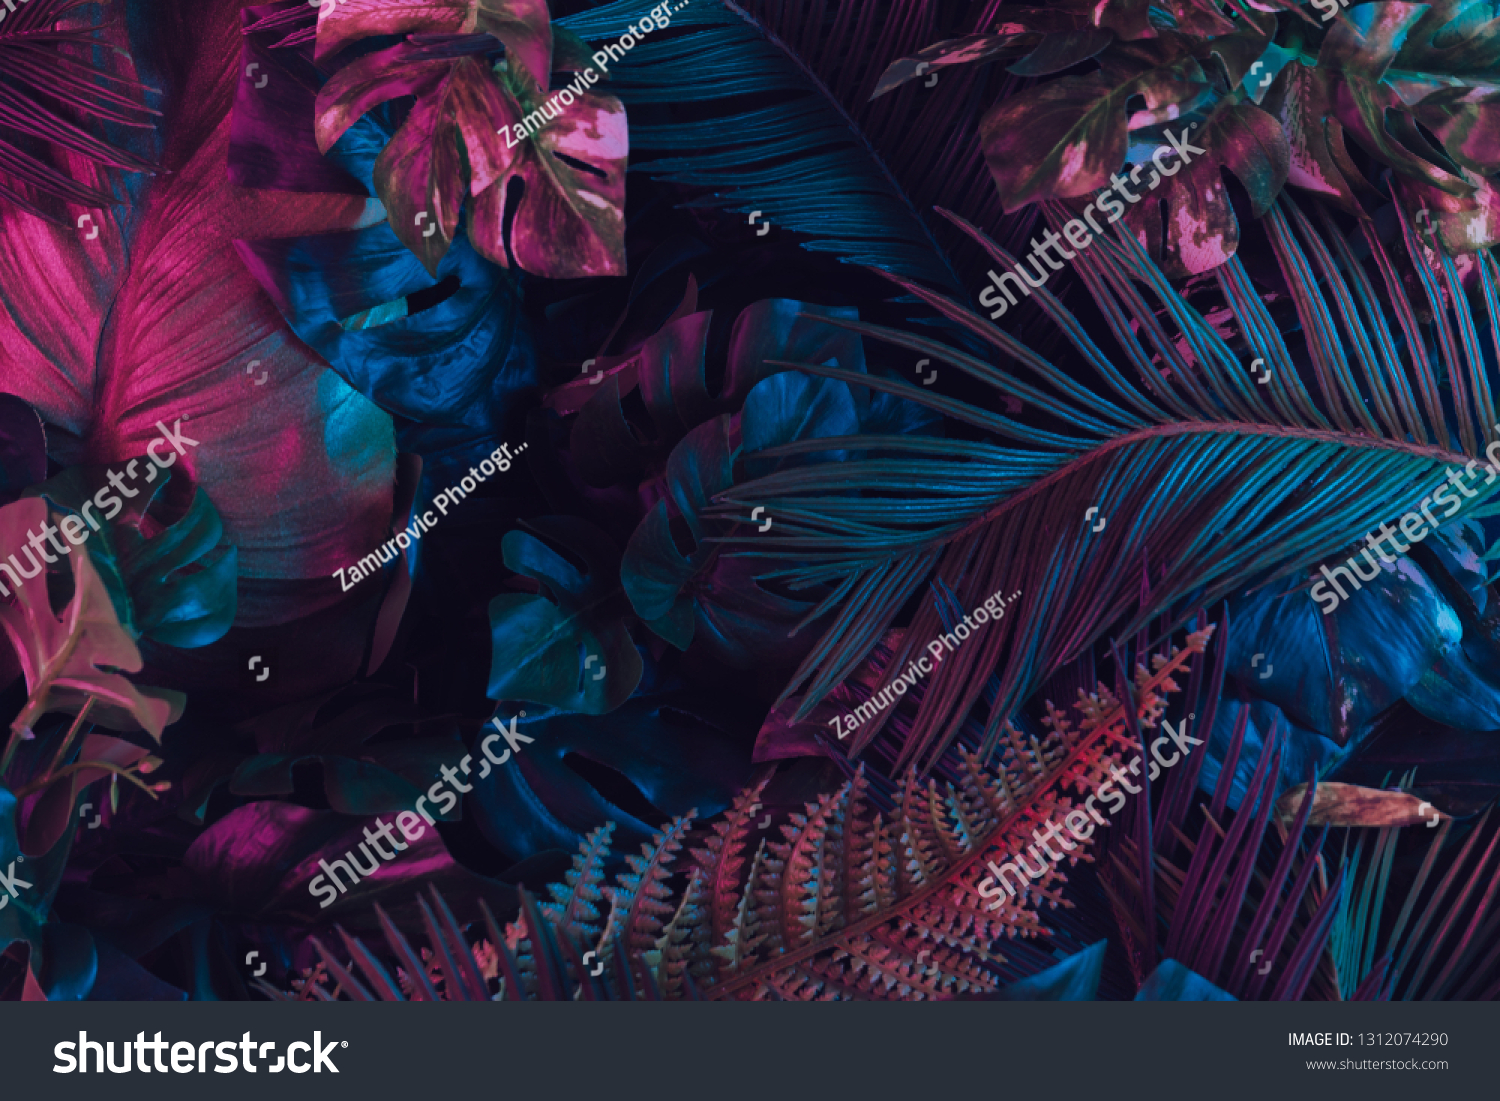 Creative fluorescent color layout made of tropical leaves. Flat lay neon colors. Nature concept. #1312074290